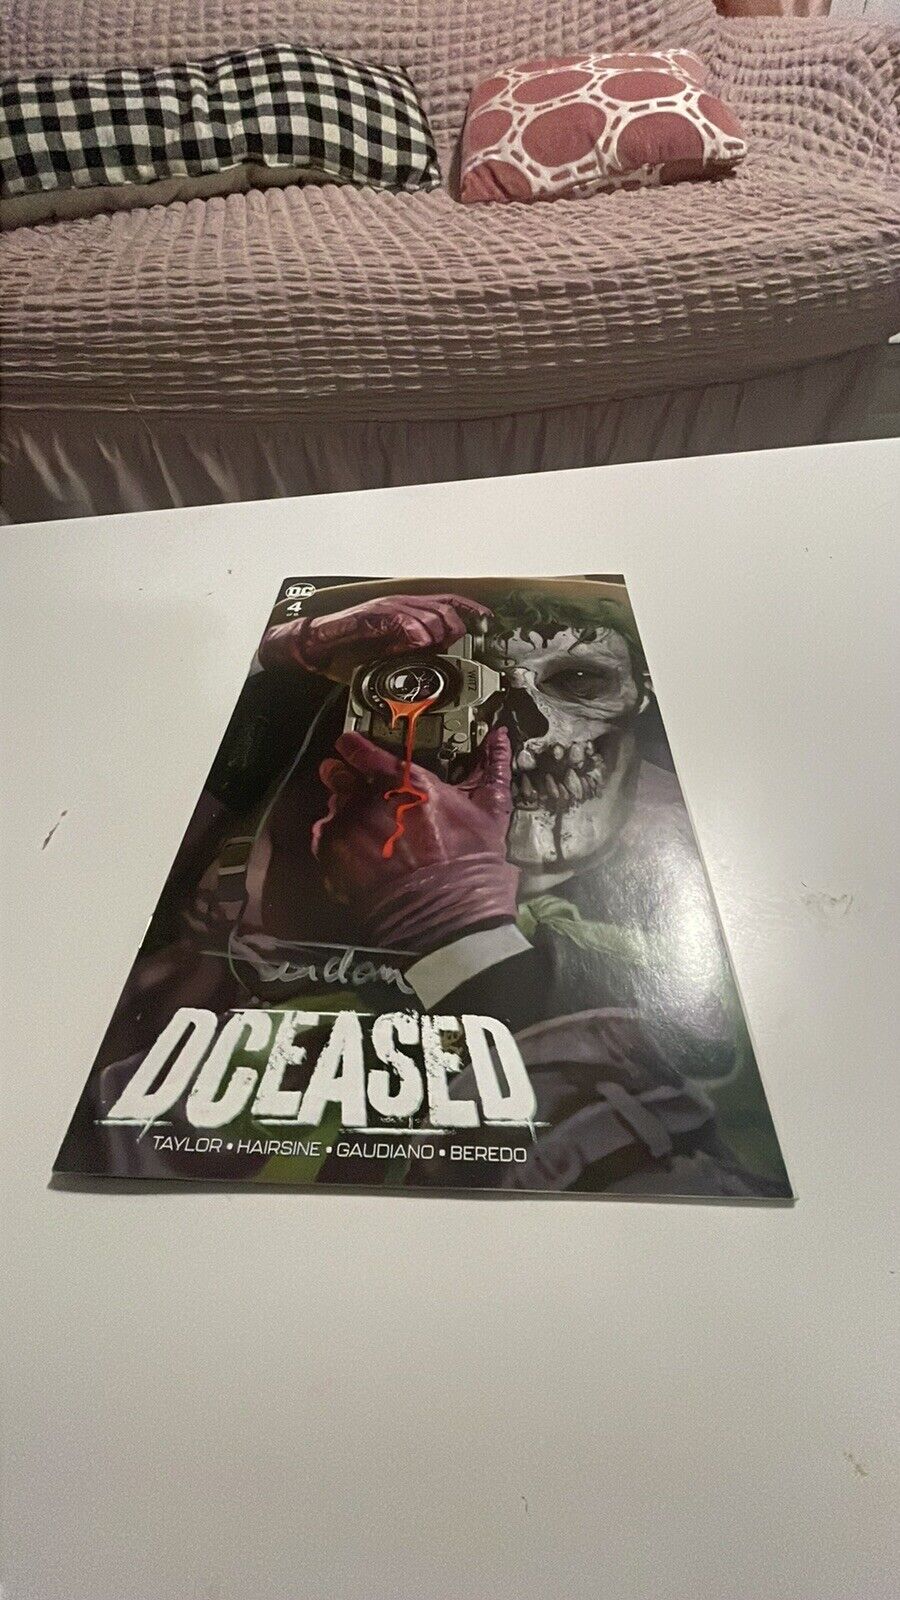 A PERFECT DCEASED COMIC, AUTOGRAPHED BY THE AUTHOR